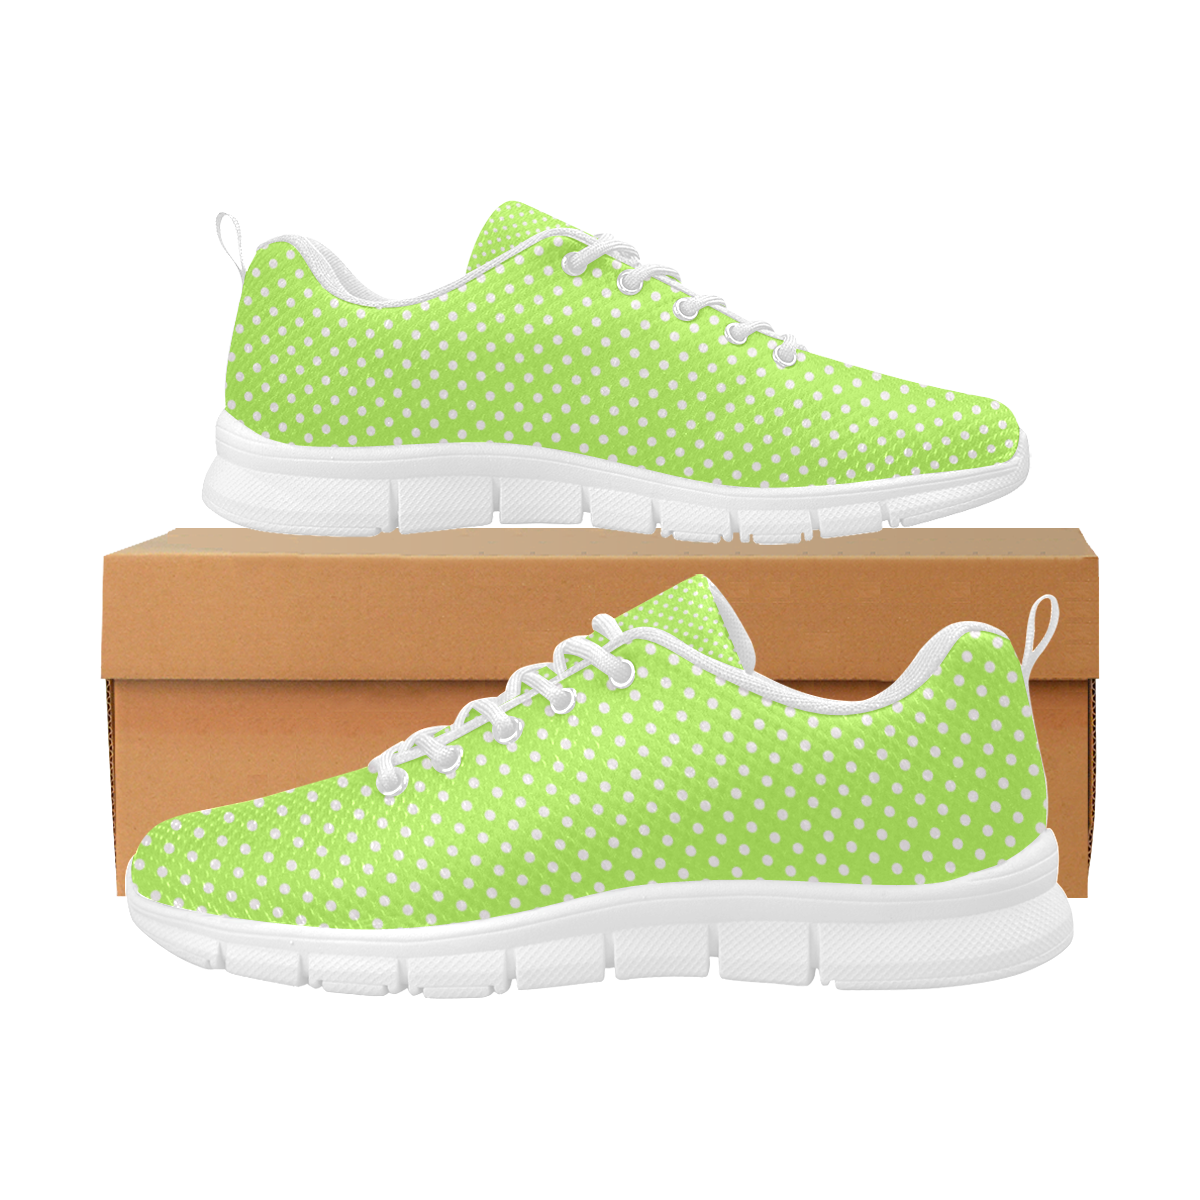 Mint green polka dots Women's Breathable Running Shoes (Model 055)